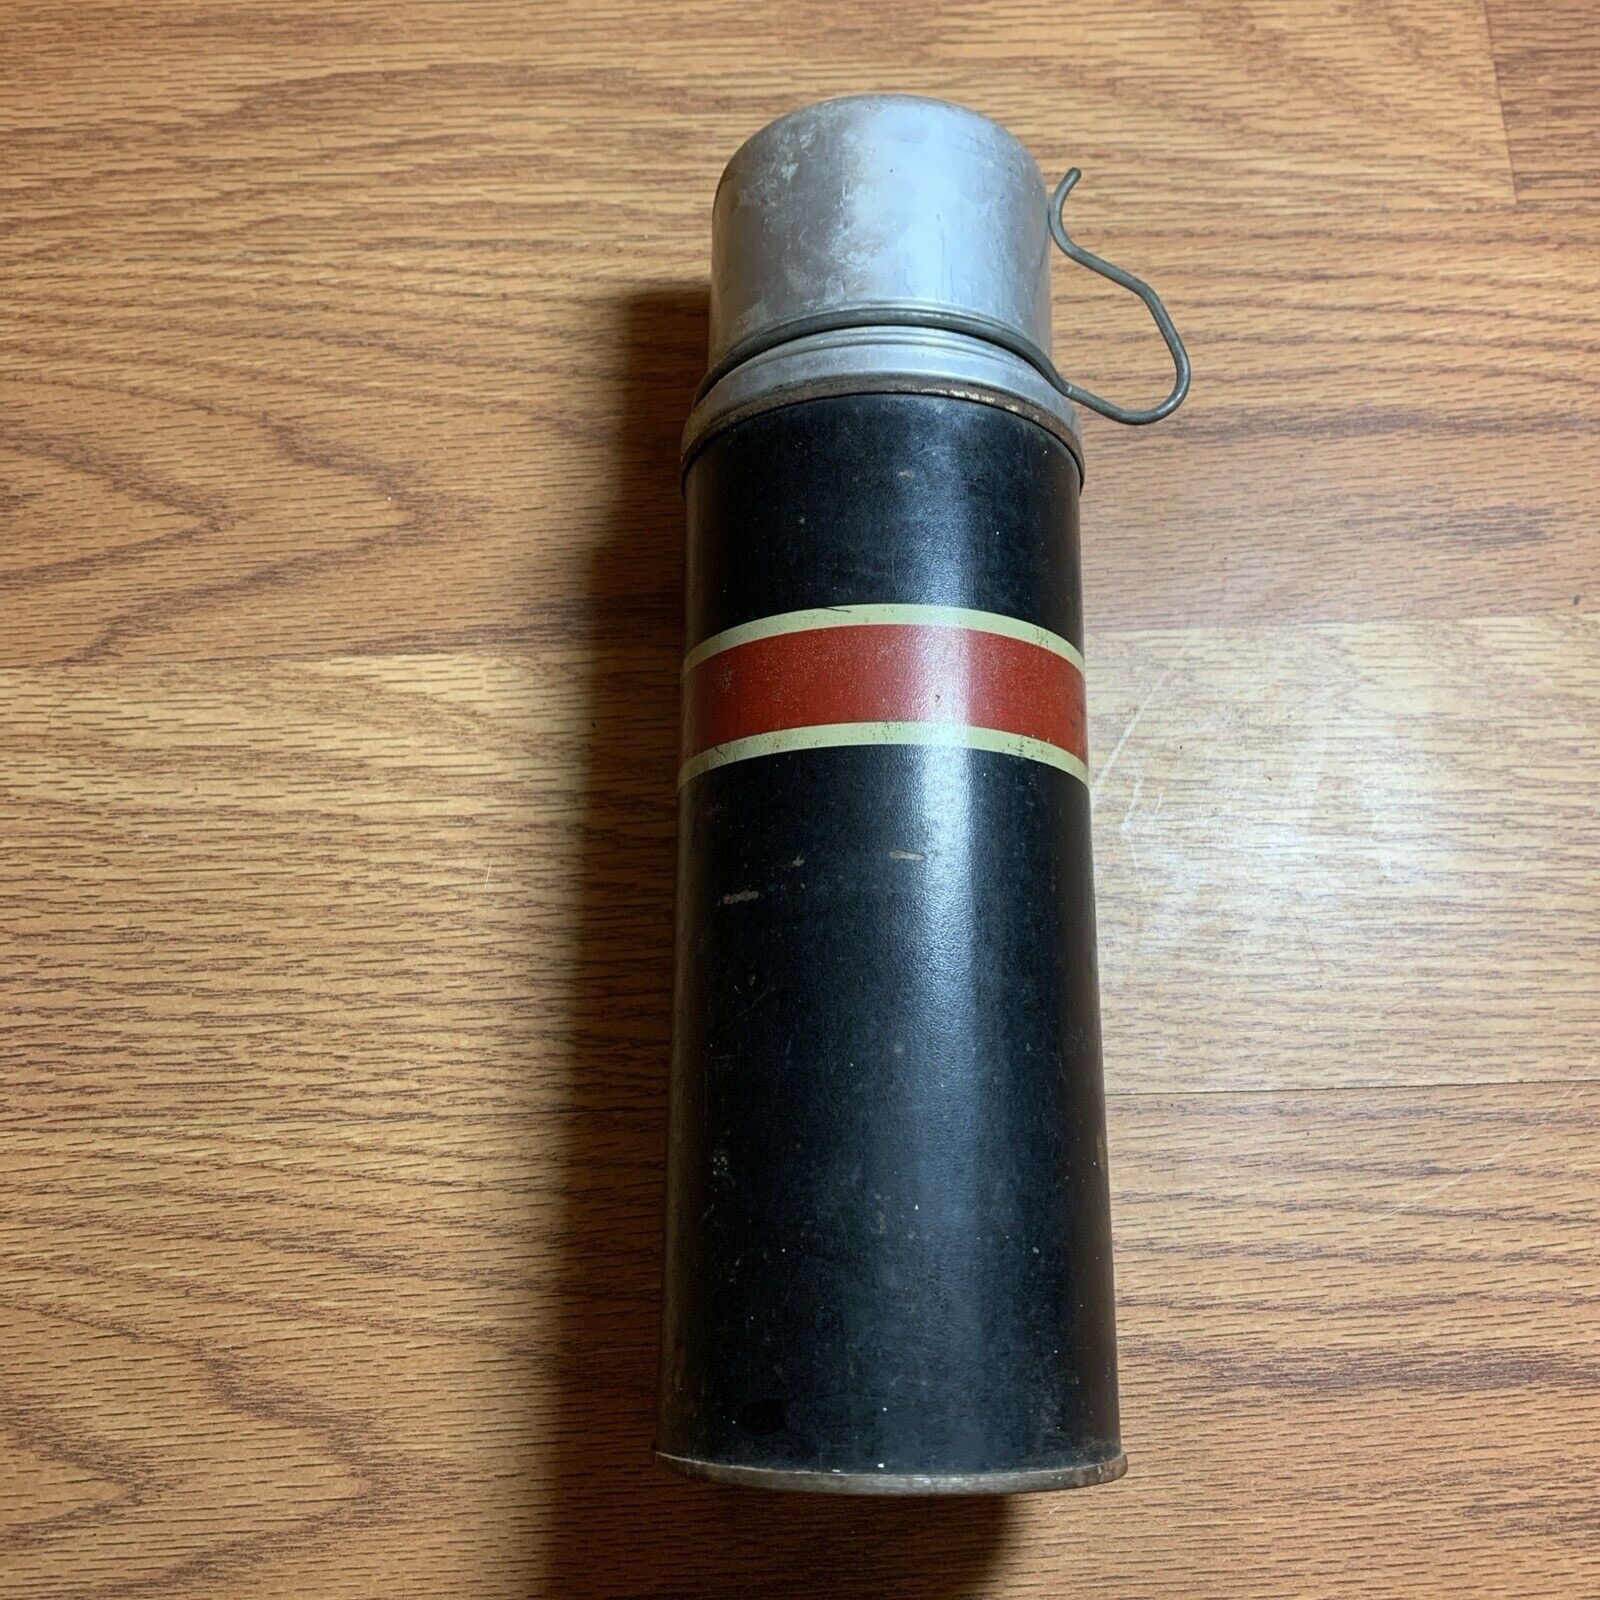 Vintage Thermos Bottle 7 1/2 Blk with Red Stripe Cork Stopper & cup Made USA